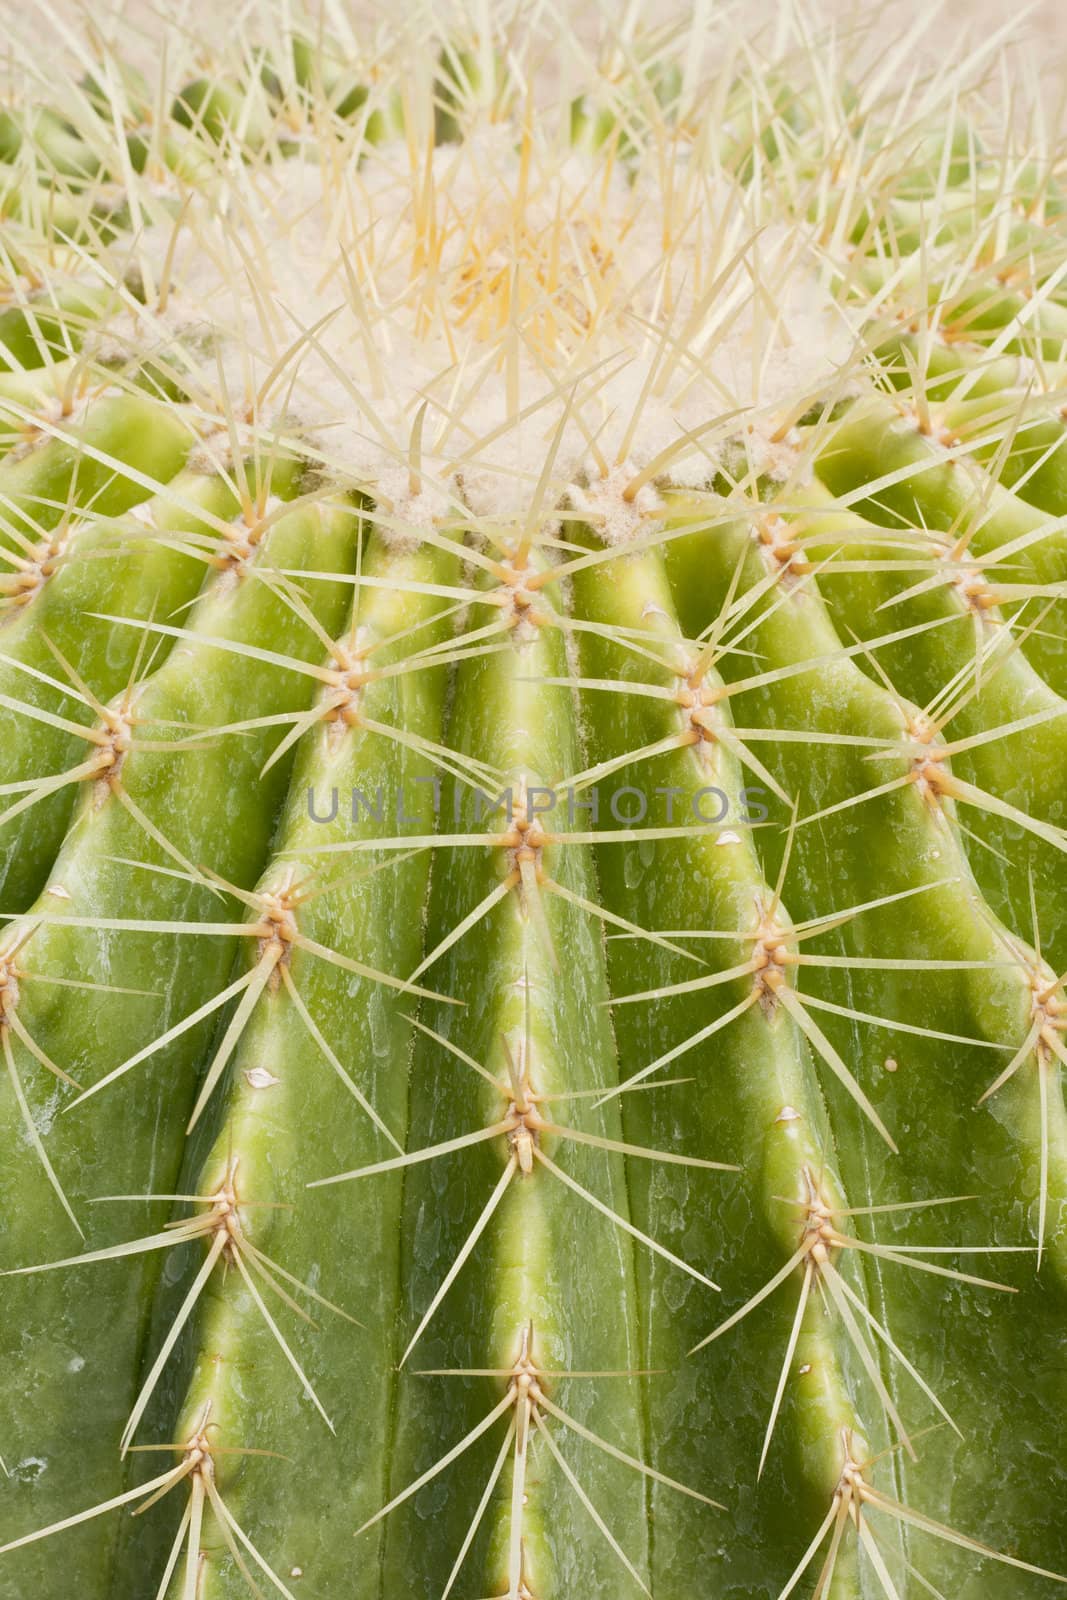 Cactus is a plant that needs very little water.